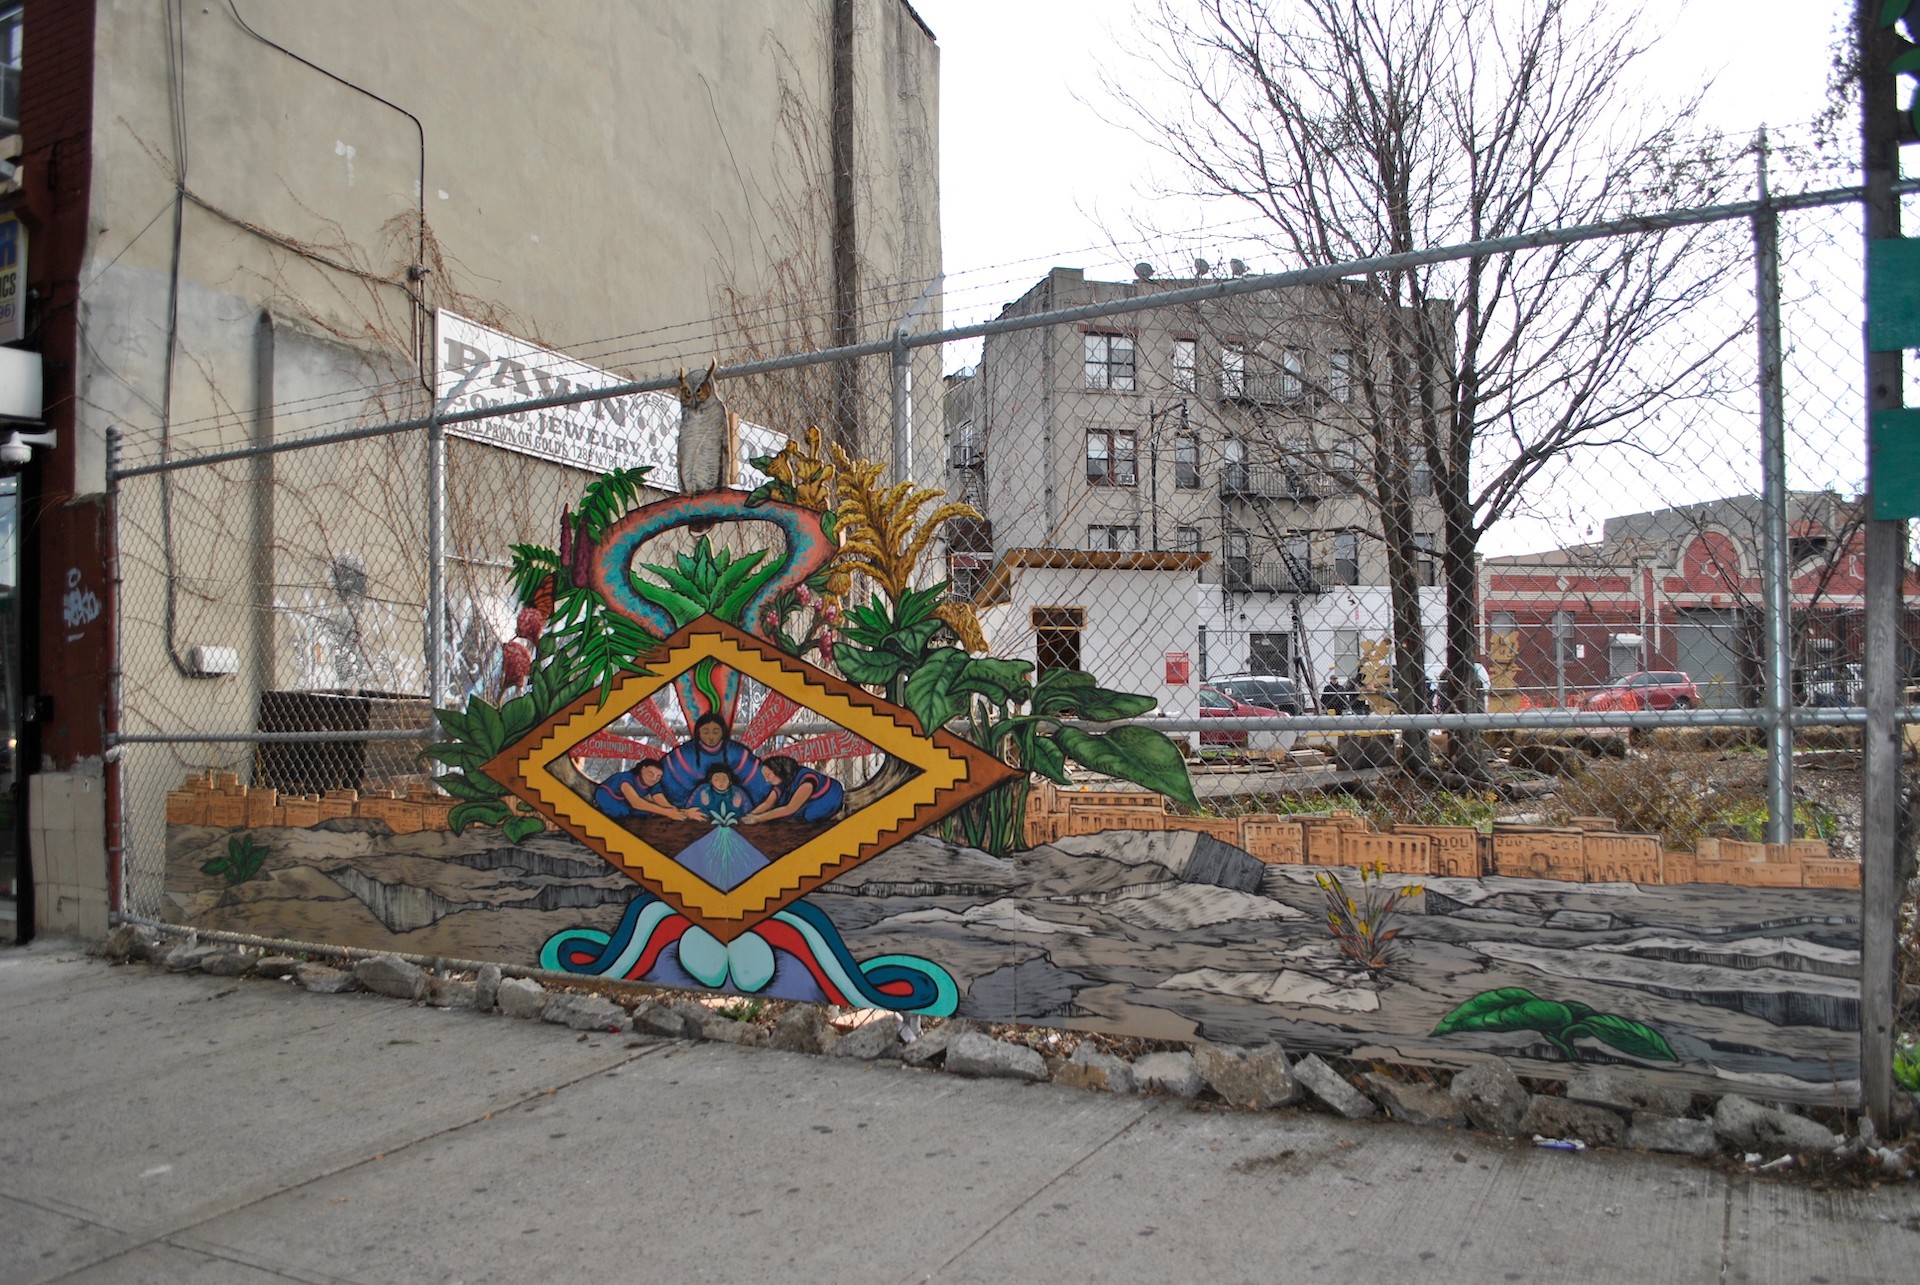 A colourful sculpture attached to a garden fence in Bushwick, New York